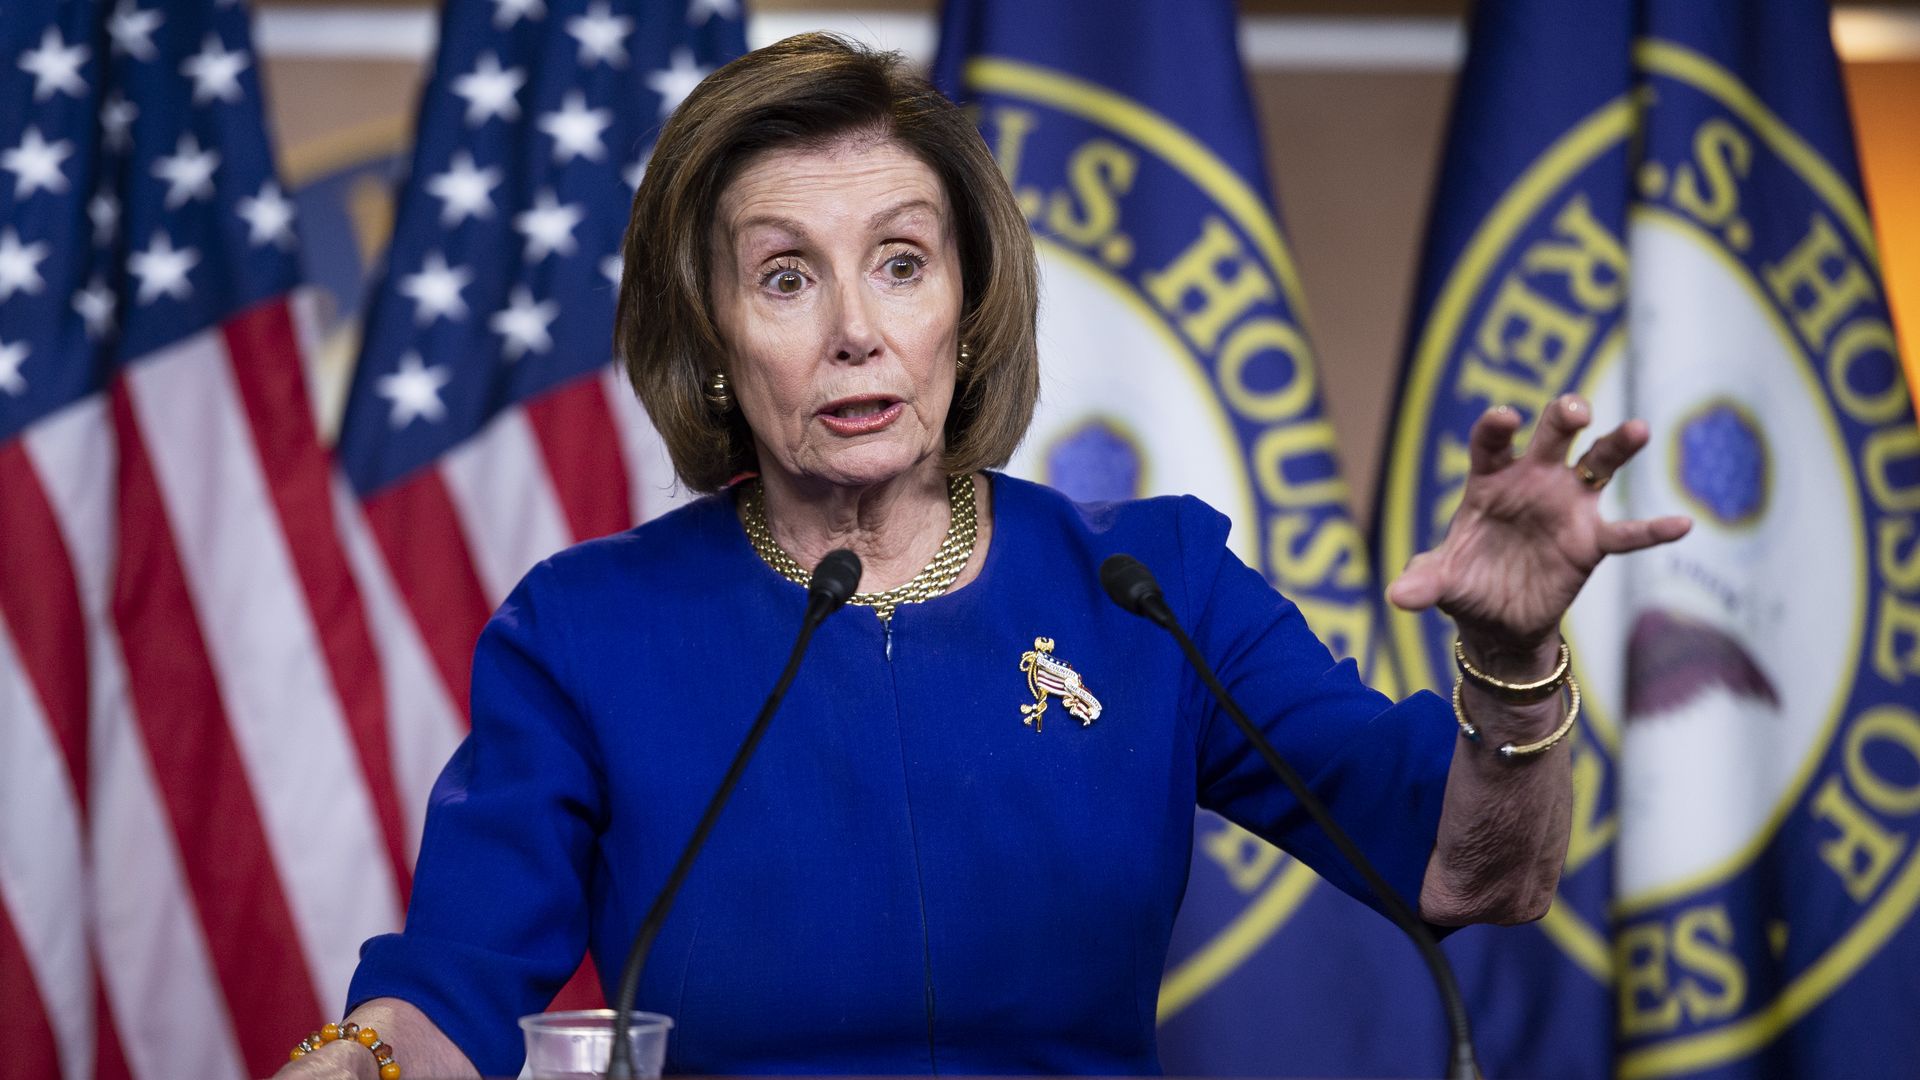 Speaker of the House Nancy Pelosi, D-Calif., speaks during a news conference on Capitol Hill in Washington on Thursday